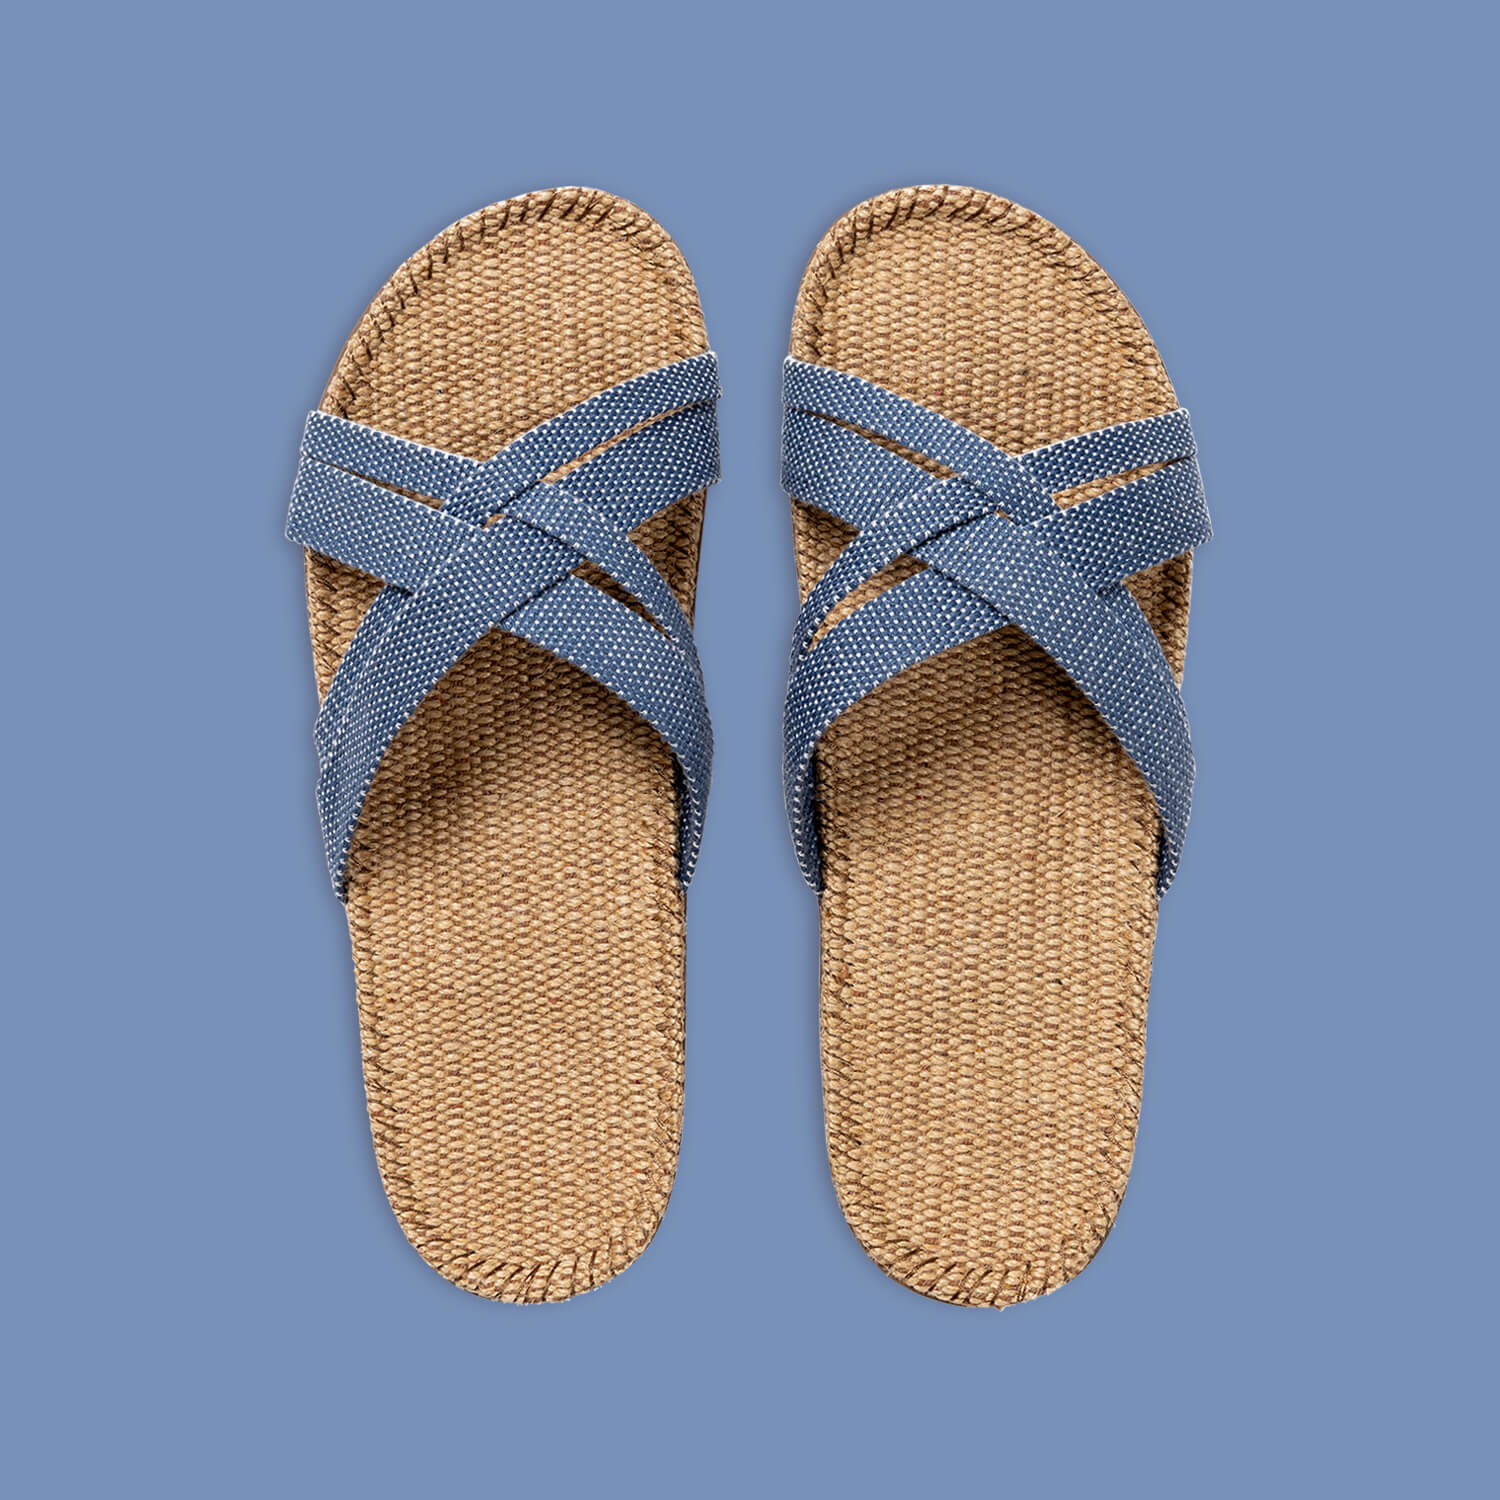 Danish Sandals - Womens #1 | Blue Dots | Light Breathable Washable | by Shangies - Lifestory - Shangies by Stilov